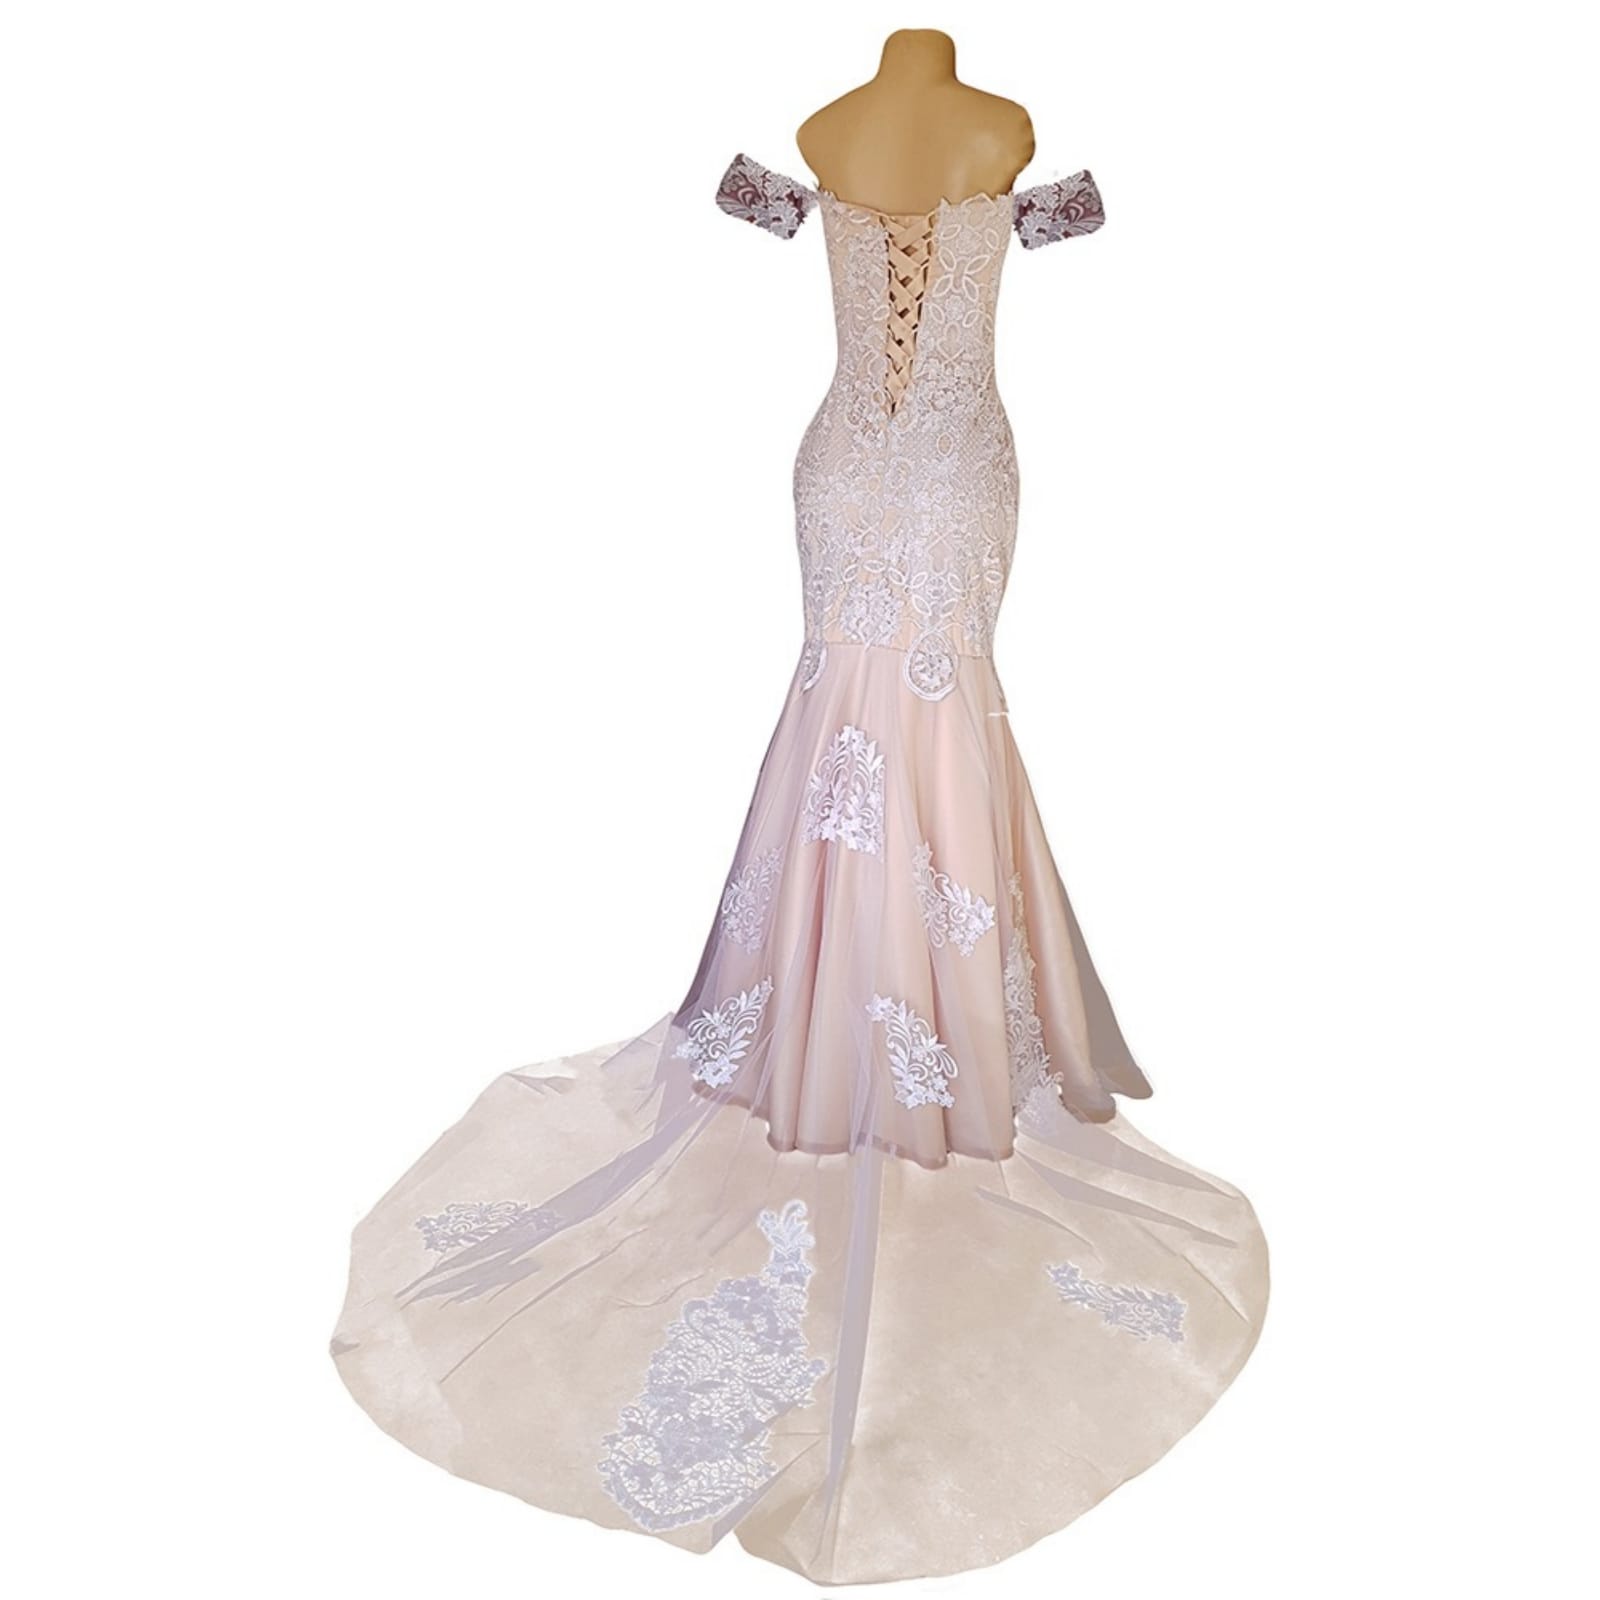 White lace and pinky peach mermaid wedding dress 5 pale peach and white soft mermaid wedding dress with a lace-up open back and off-shoulder strap sleeve. With a sheer train detailed with lace.